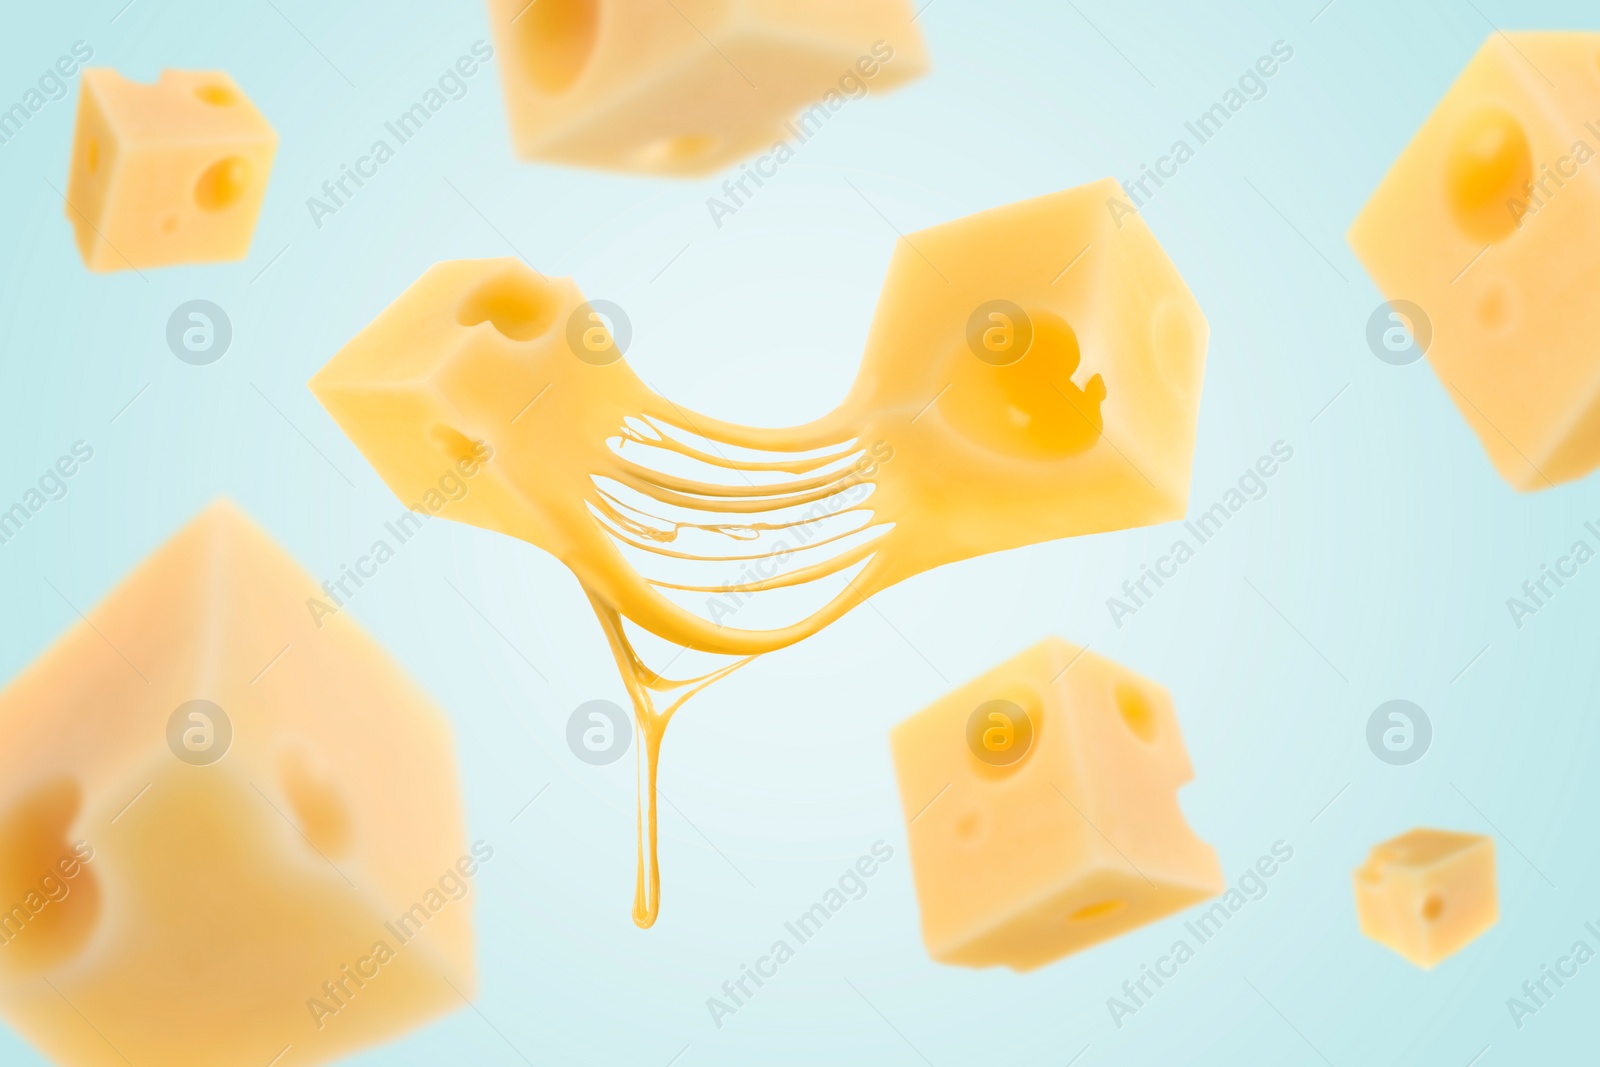 Image of Piecescheese falling on light blue background